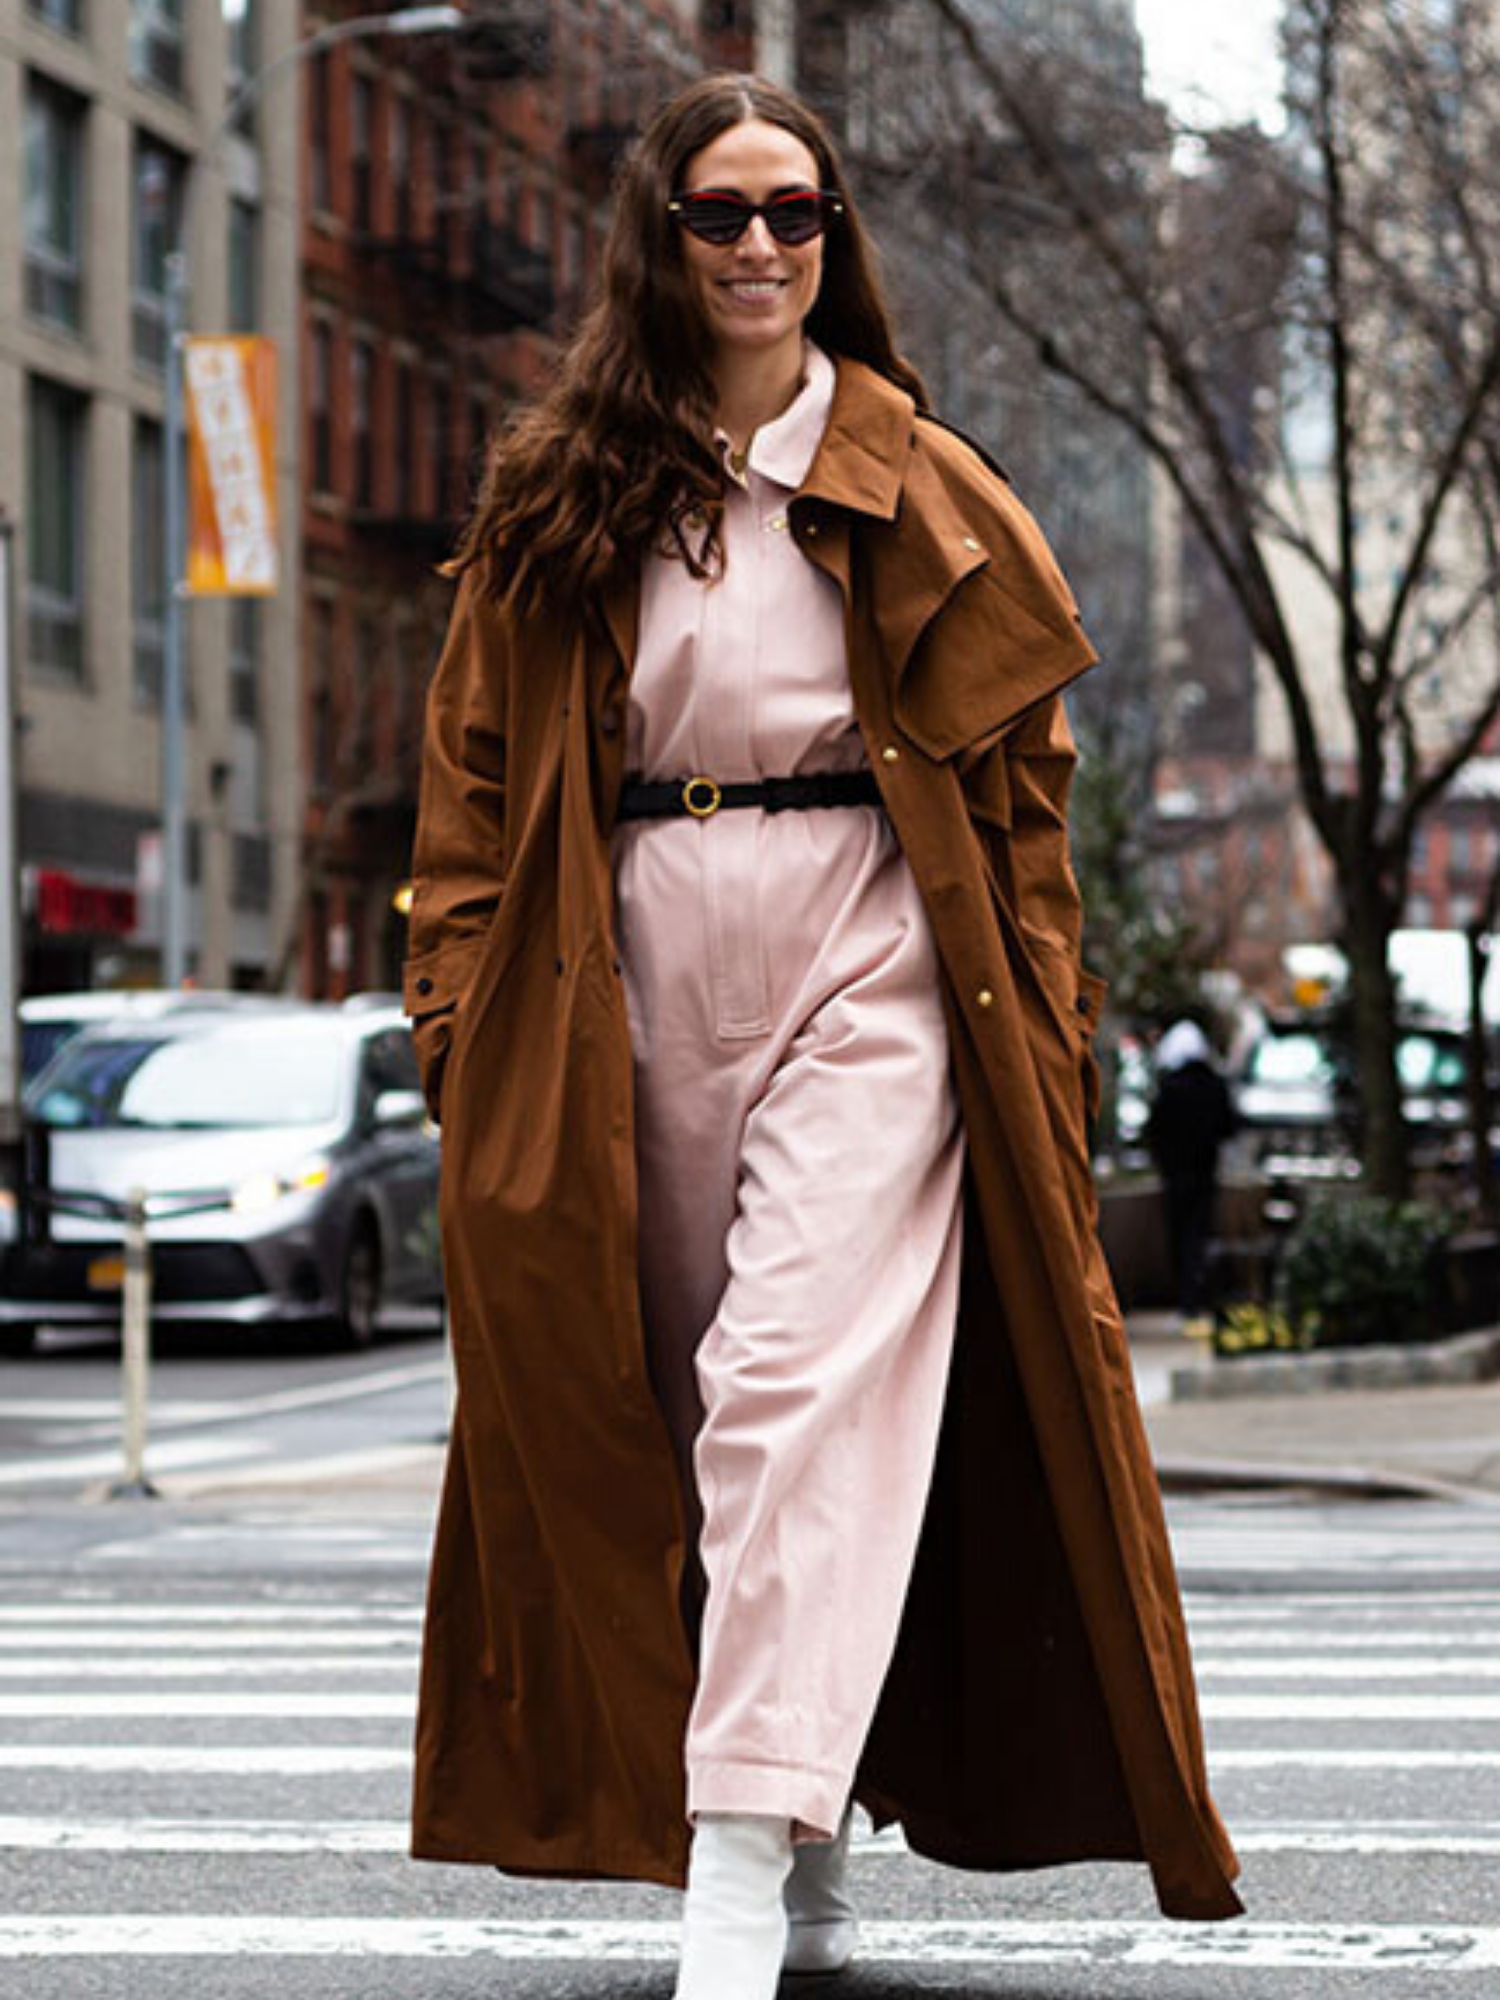 The Best Street Style From New York Fashion Week - The Gloss Magazine